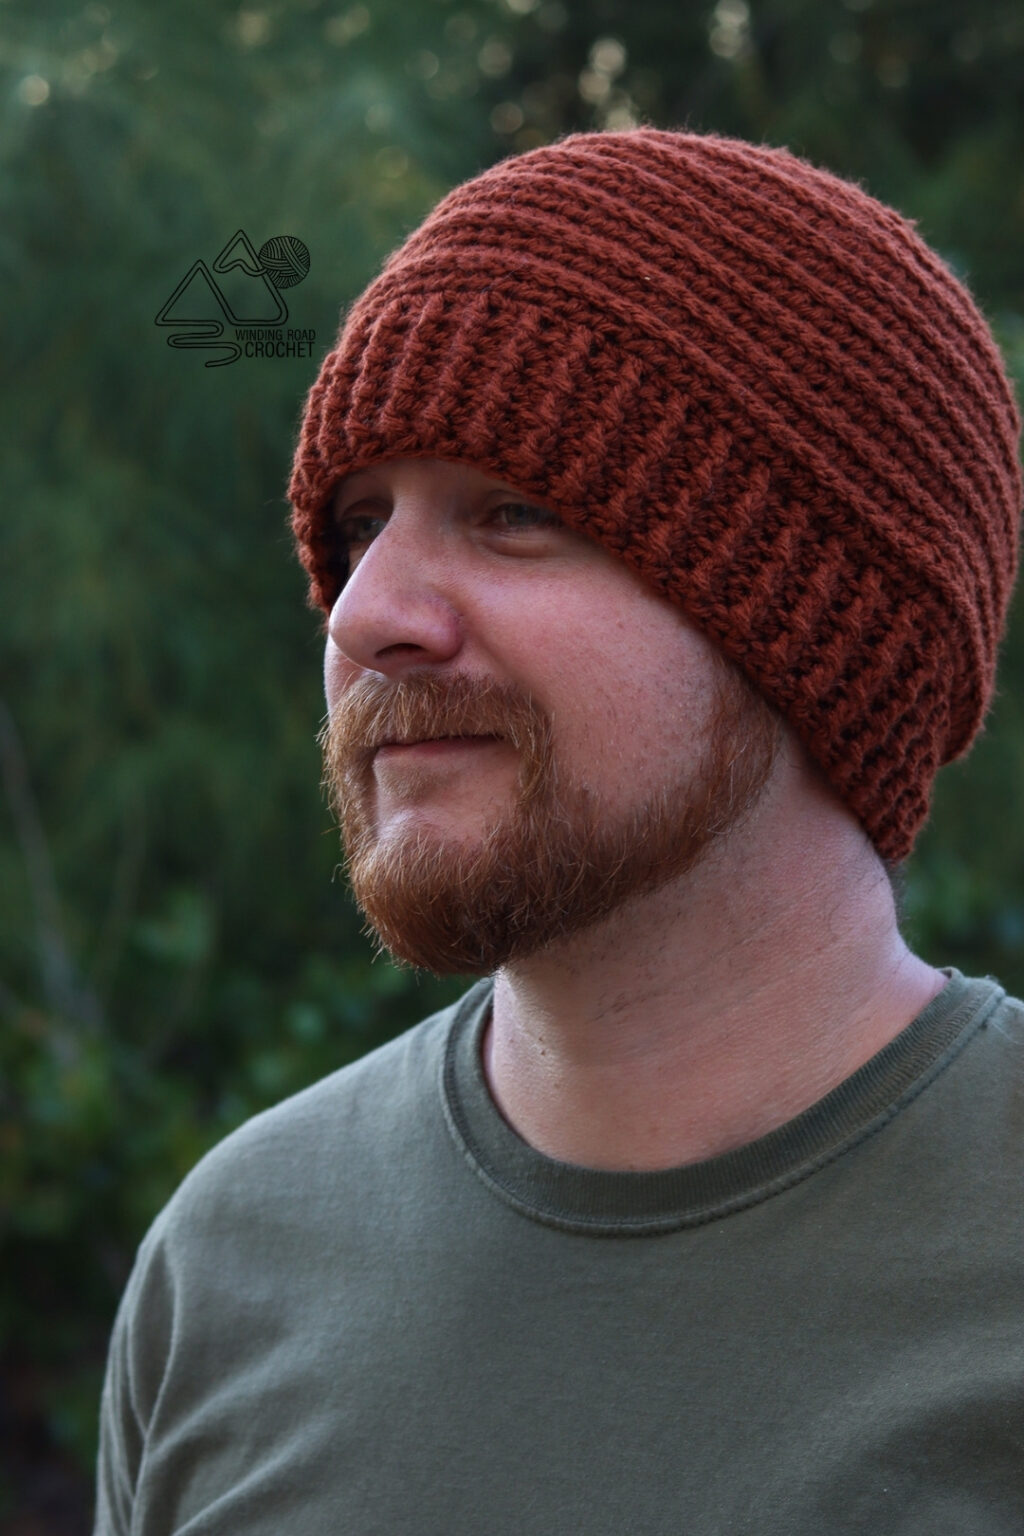 Ribbed Crochet Beanie Free Pattern And Video Tutorial Winding Road Crochet